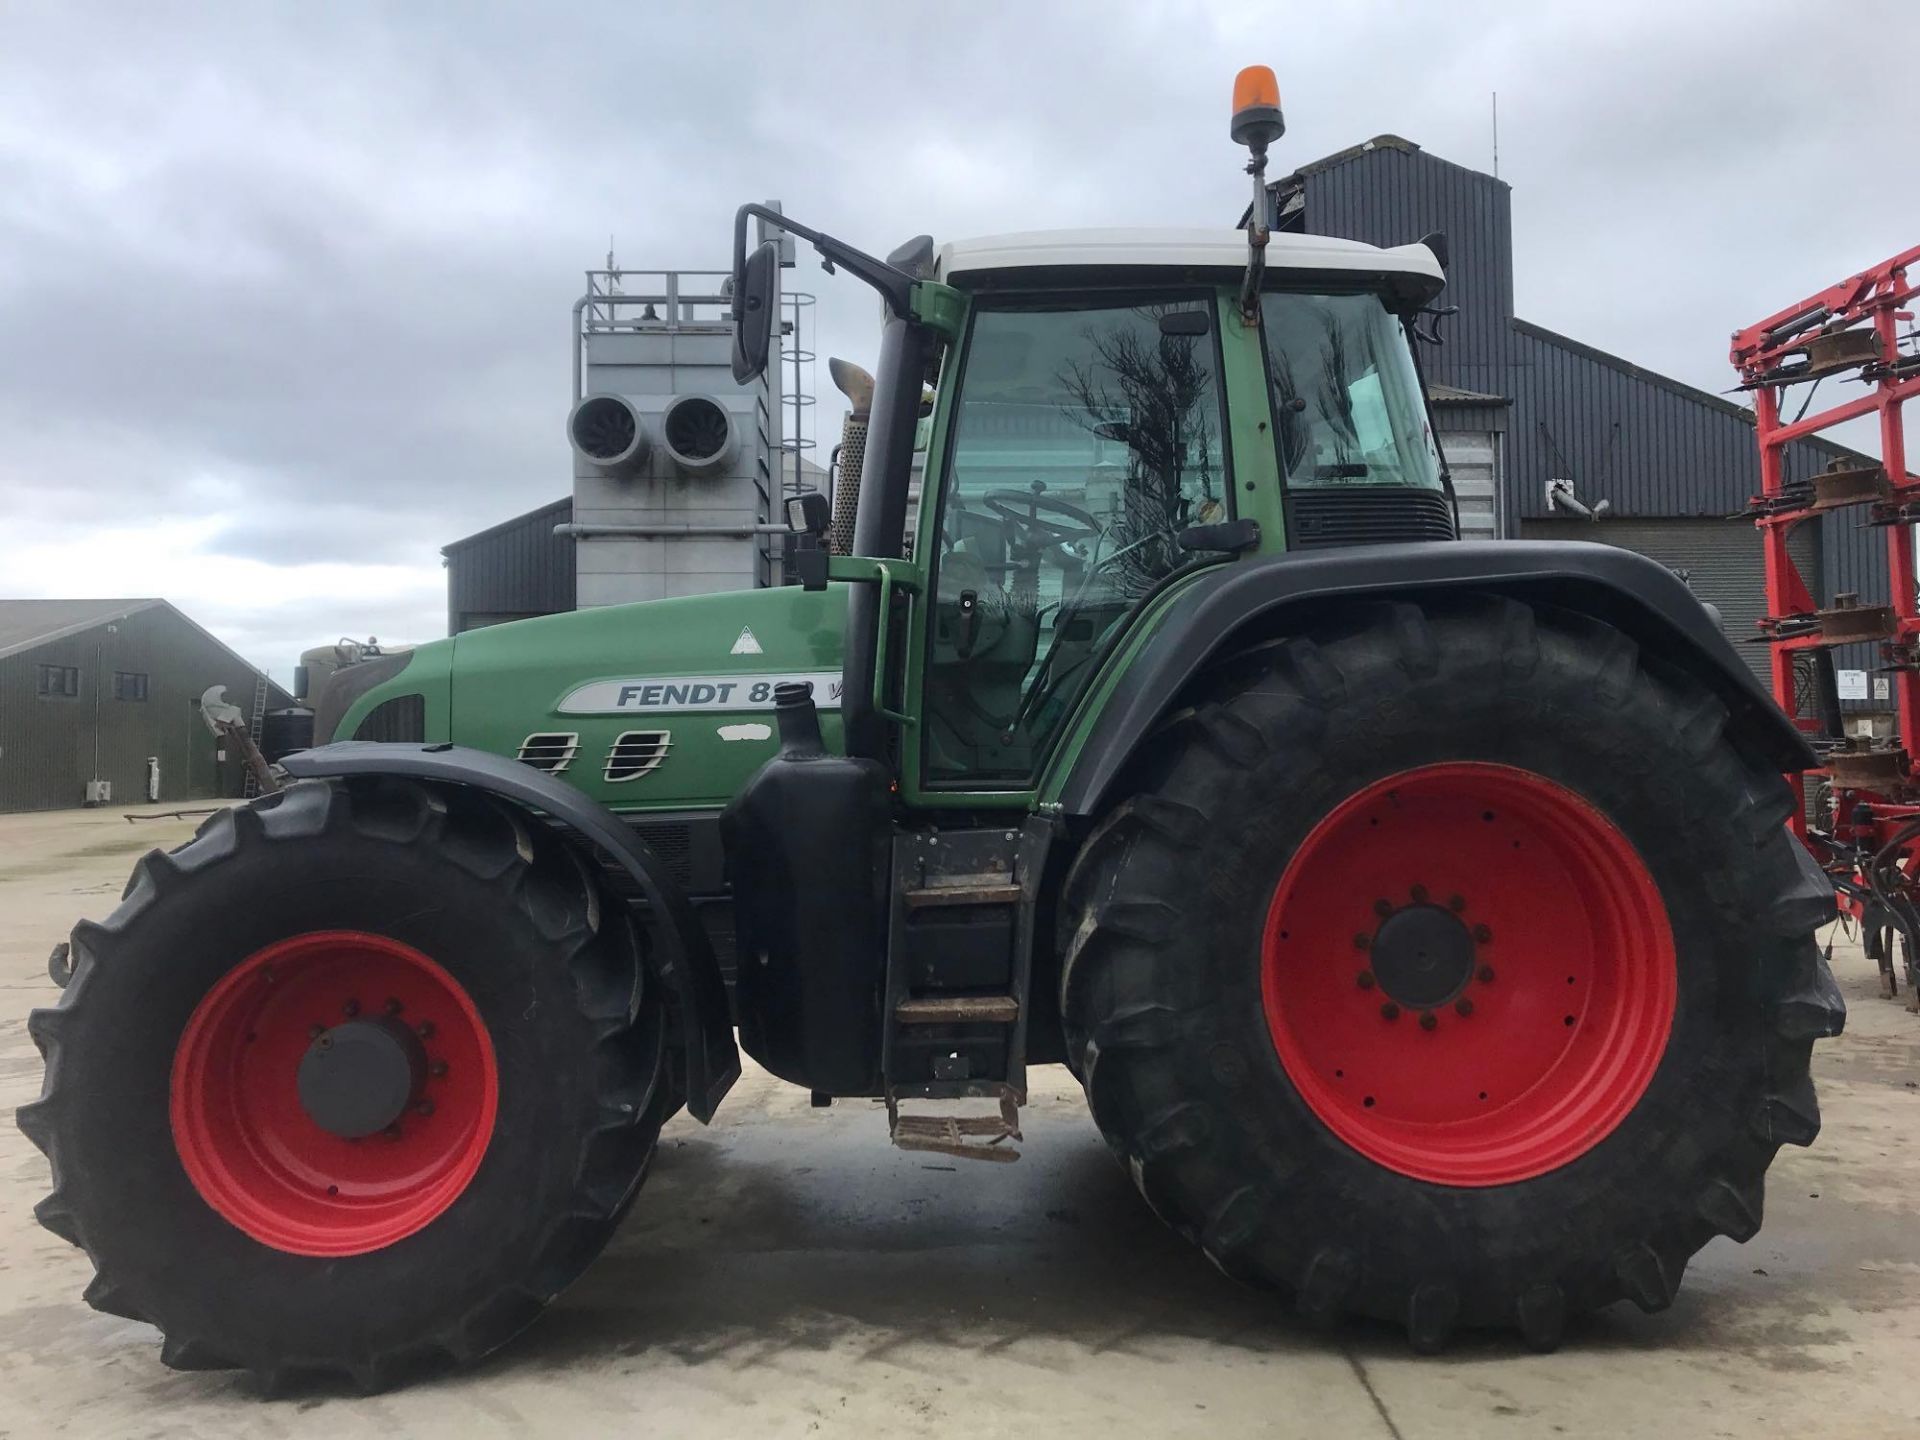 2010 Fendt 820 Vario TMS tractor, 4wd, front linkage, 4No spool valves, Bill Bennett pick up hitch. - Image 5 of 21